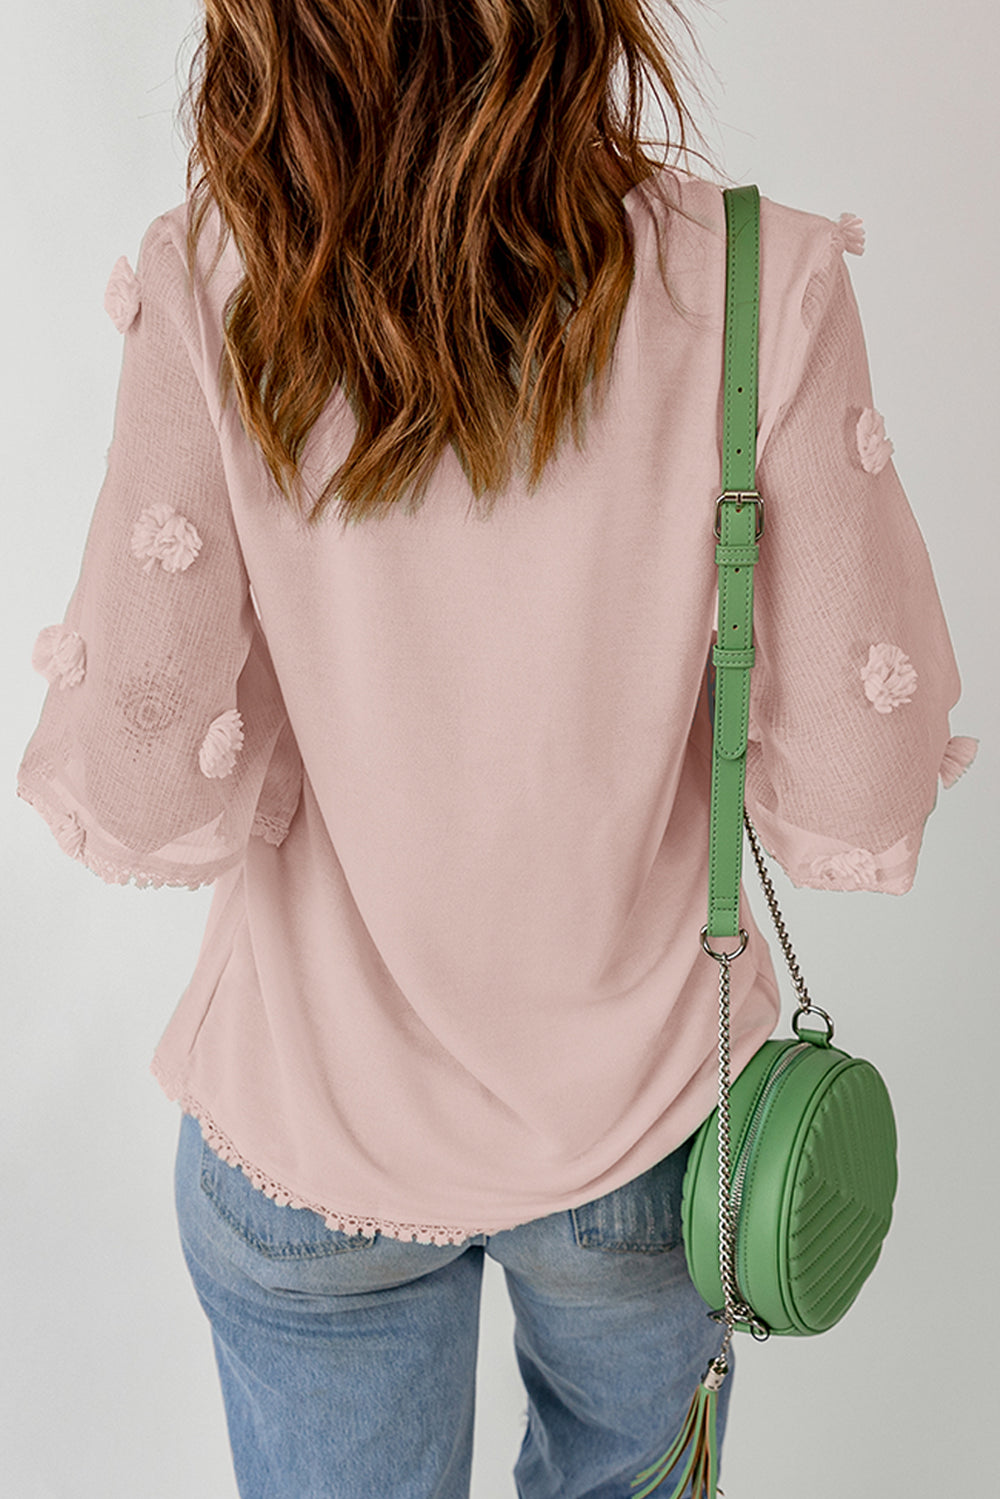 Cute Pink Crew Neck Knit Top